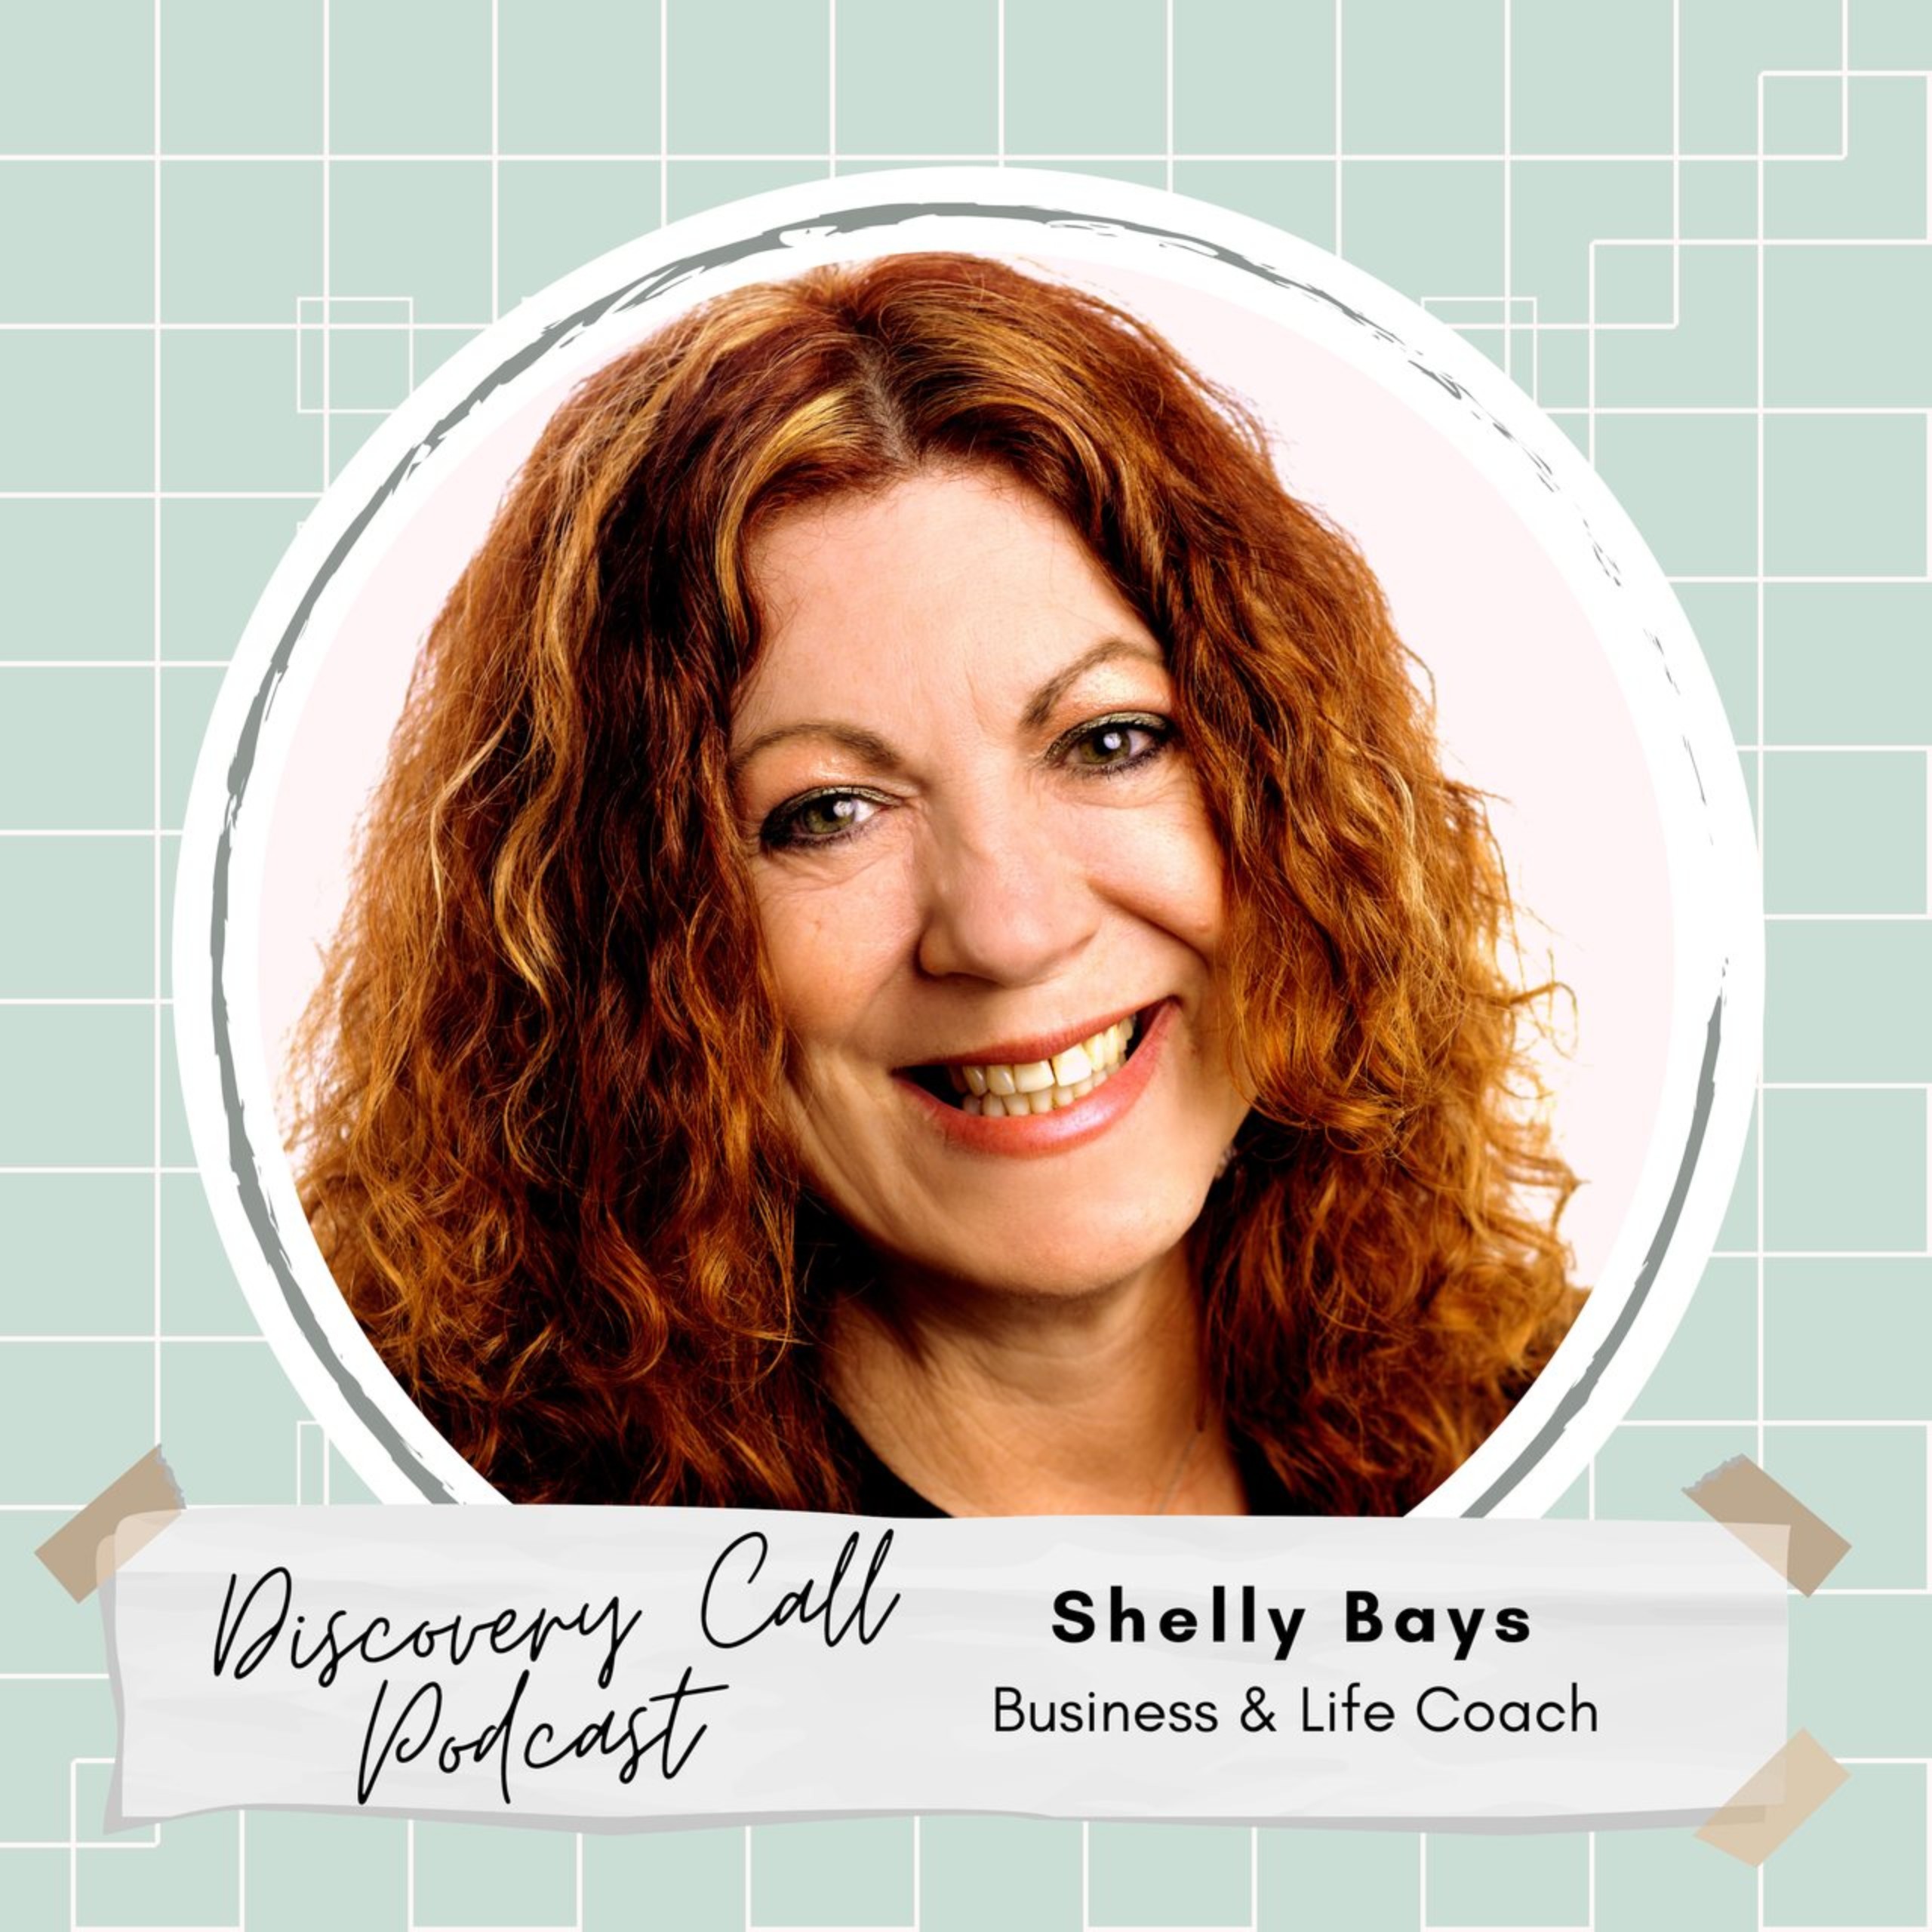 Business & Life Coach and Leveling up Leadership | Shelly Bays Image